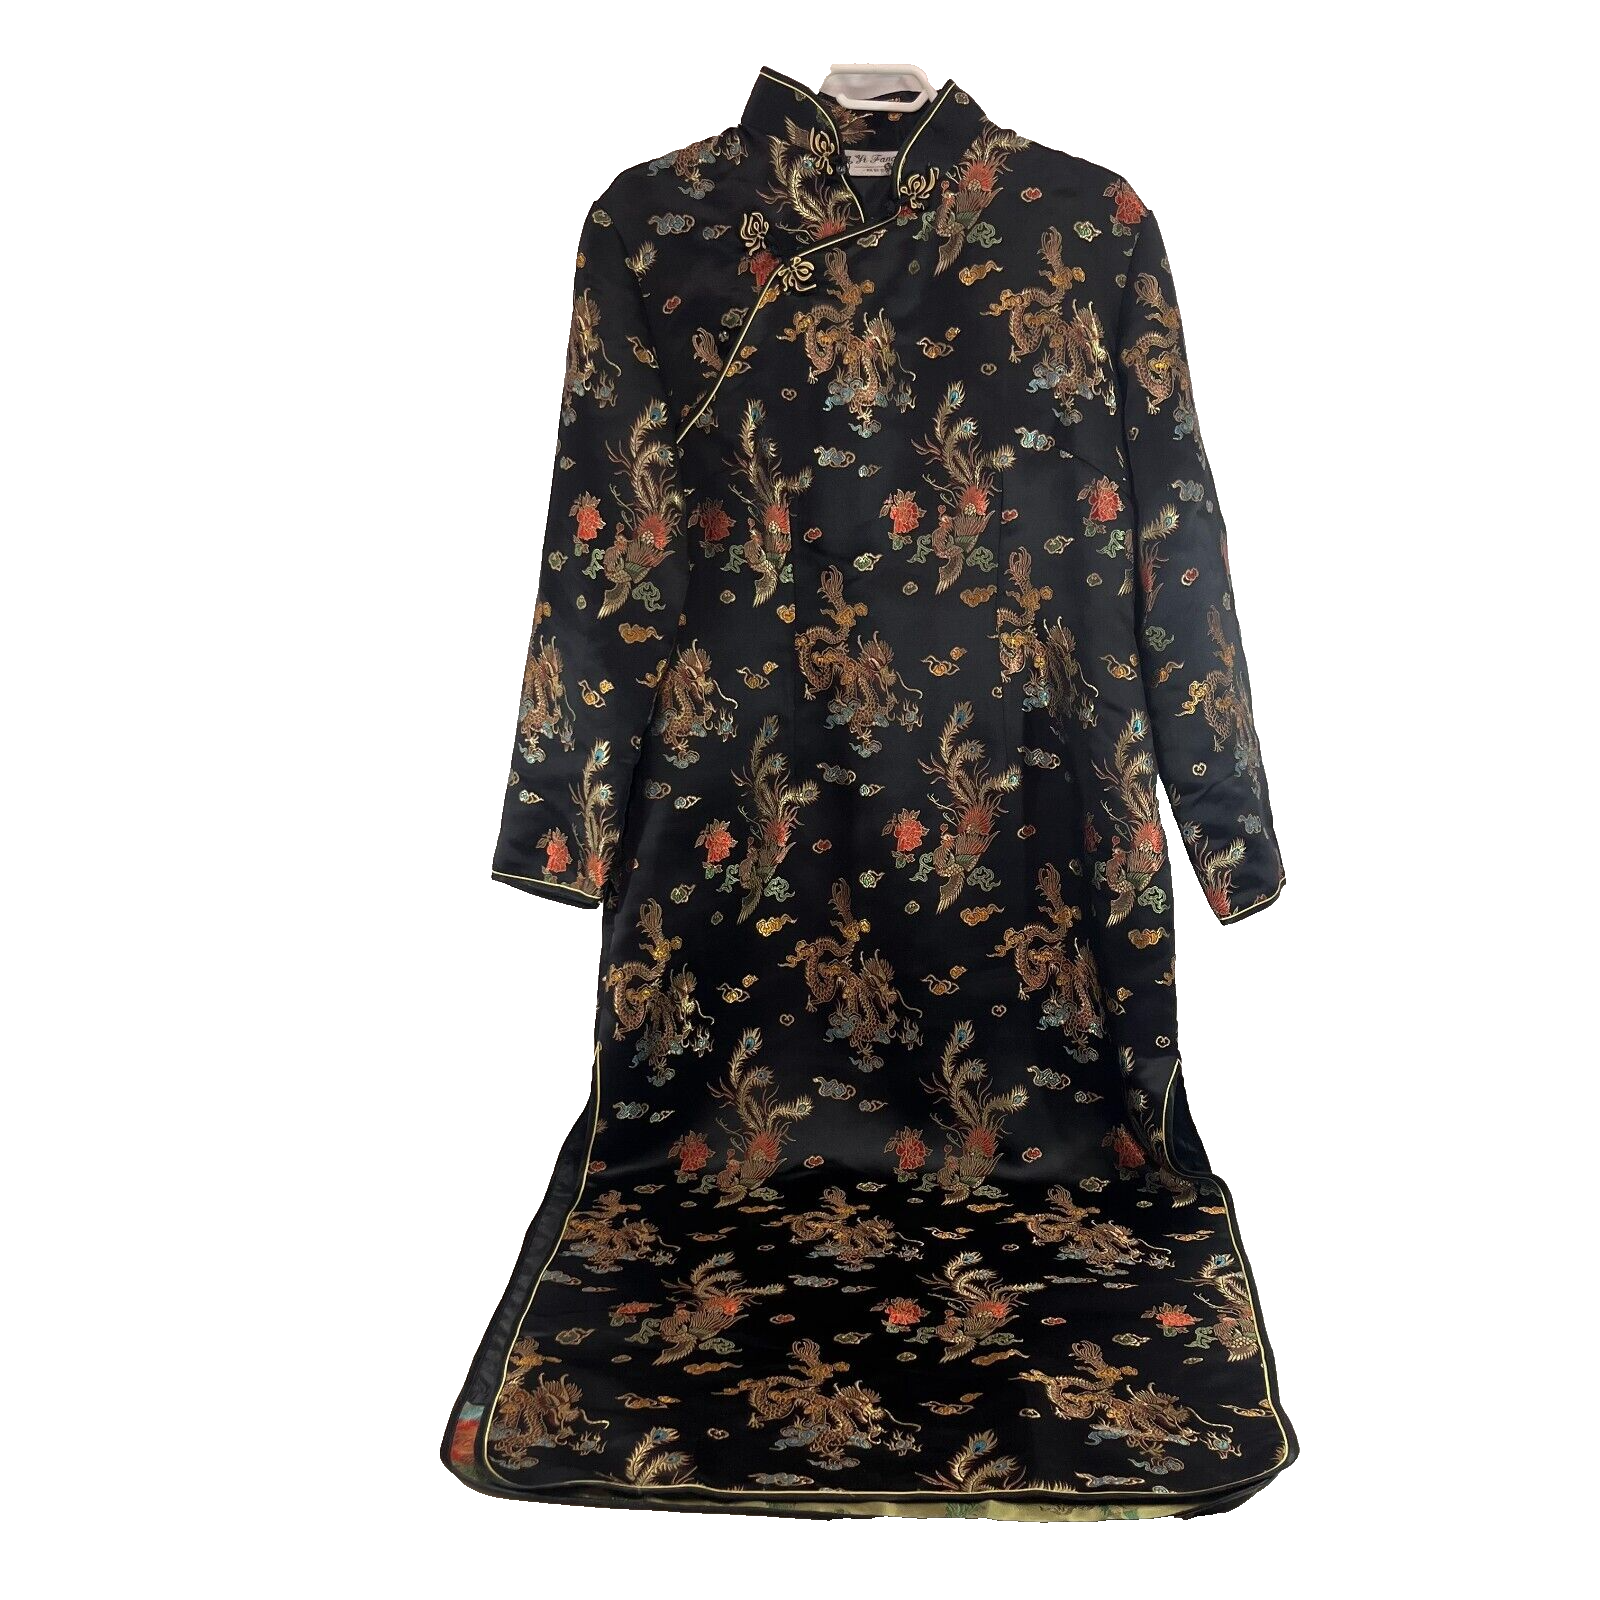 Primary image for Yi Fang Asian Cheongsam Dress Women Black Embroidered Dragon Peacock Side Slit